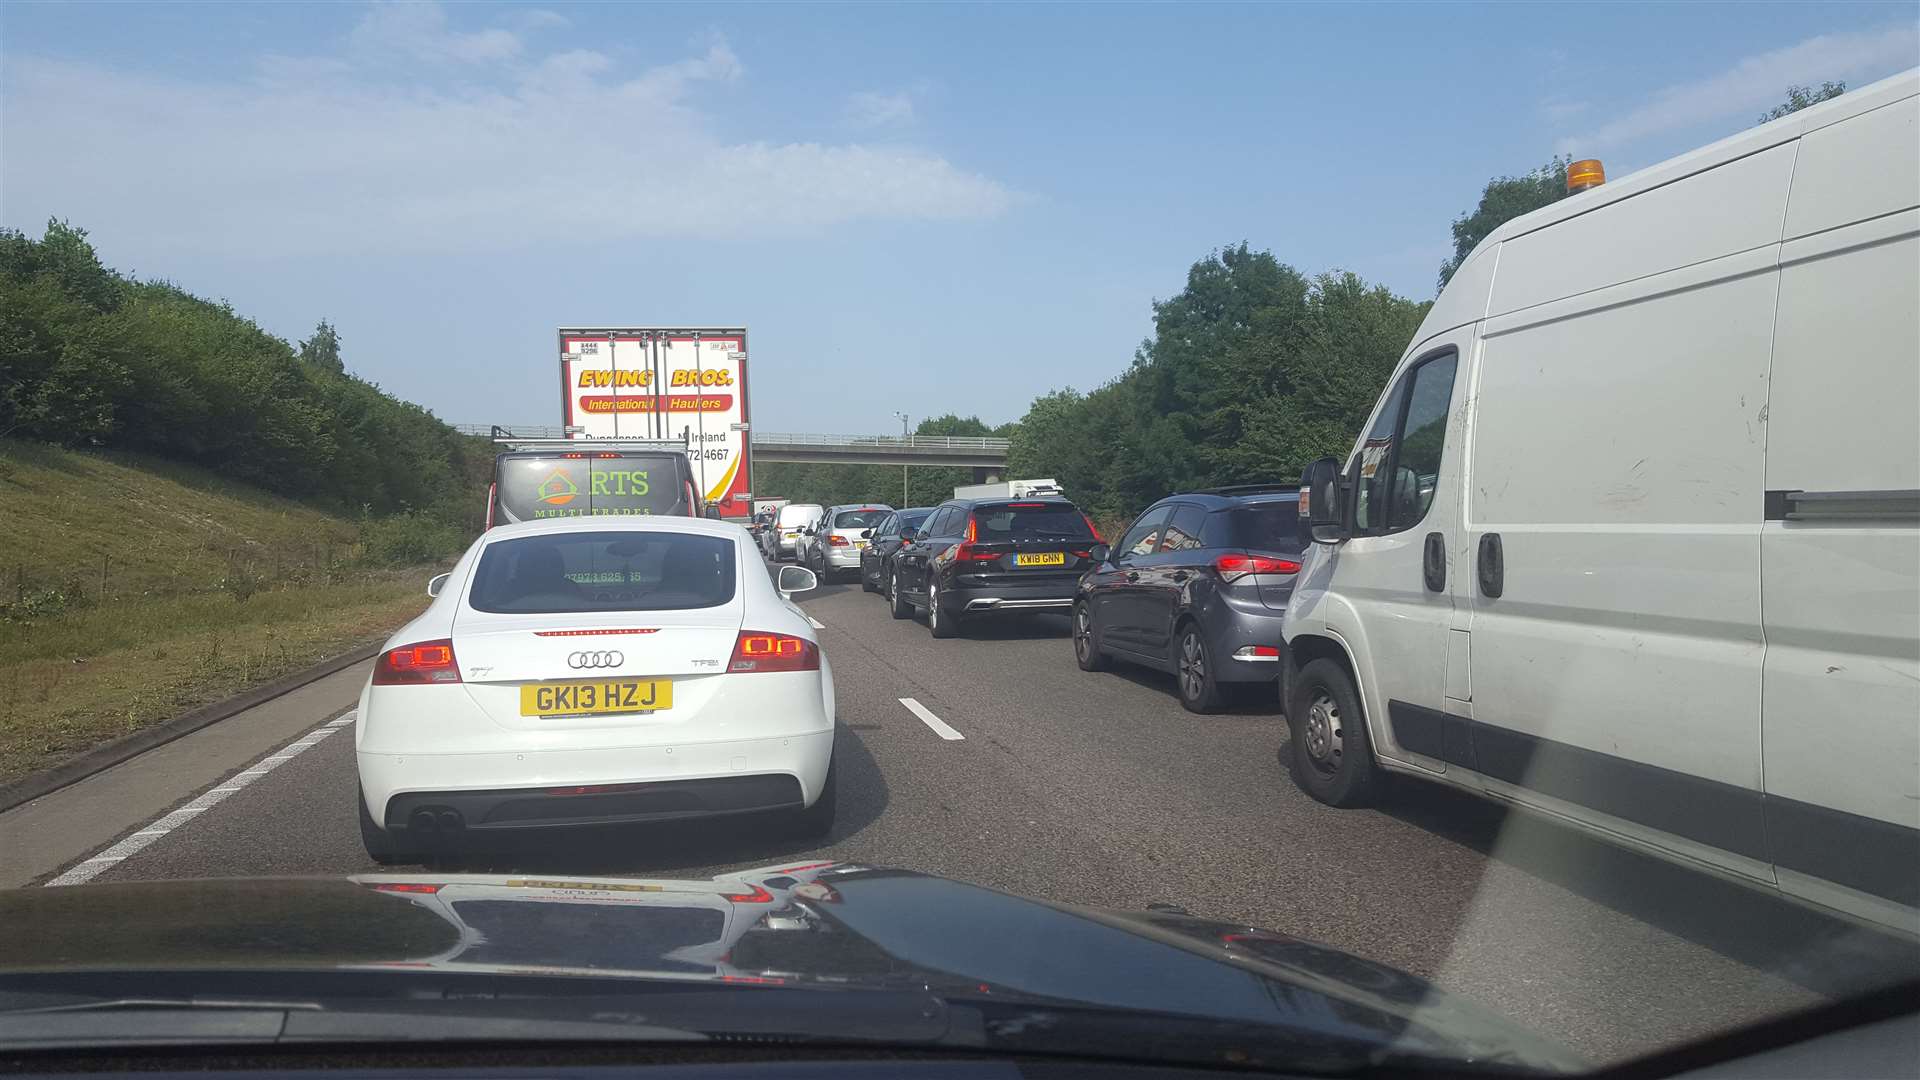 Traffic at a standstill near the Key Street turn-off on the A249, heading towards Sheppey